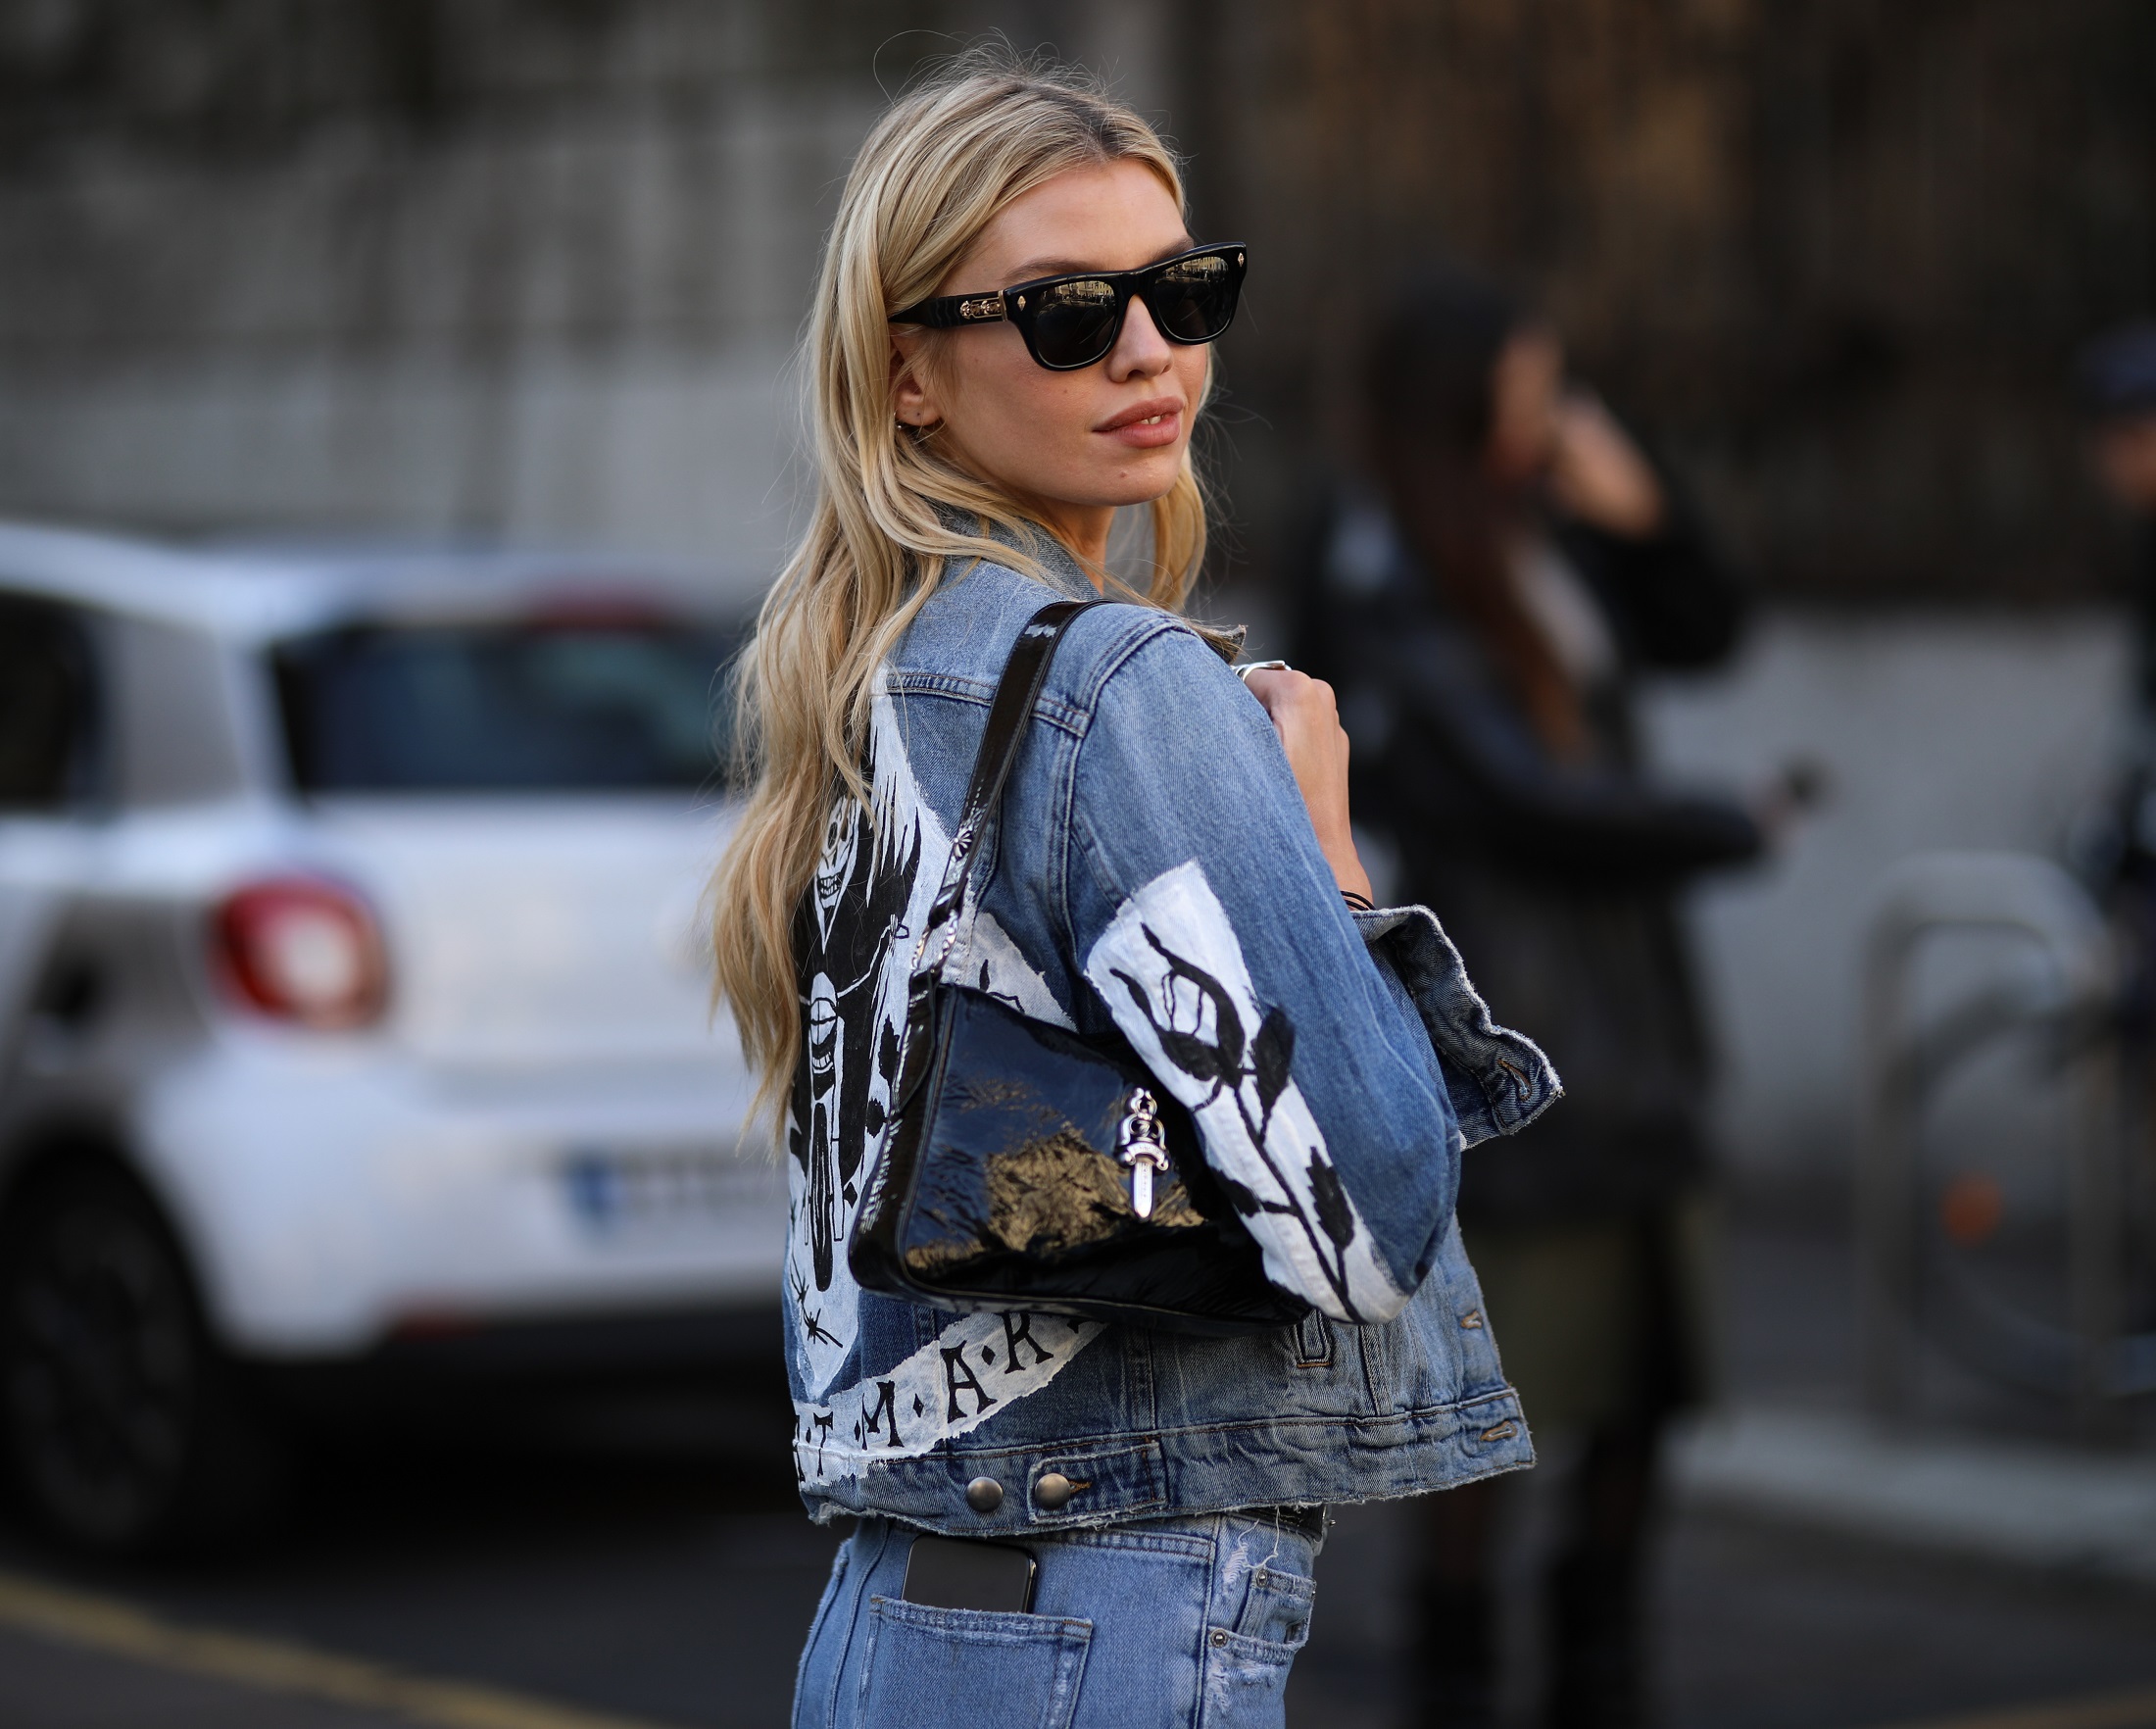 Bored with your old denim jacket? Check out our ways to give it a second life